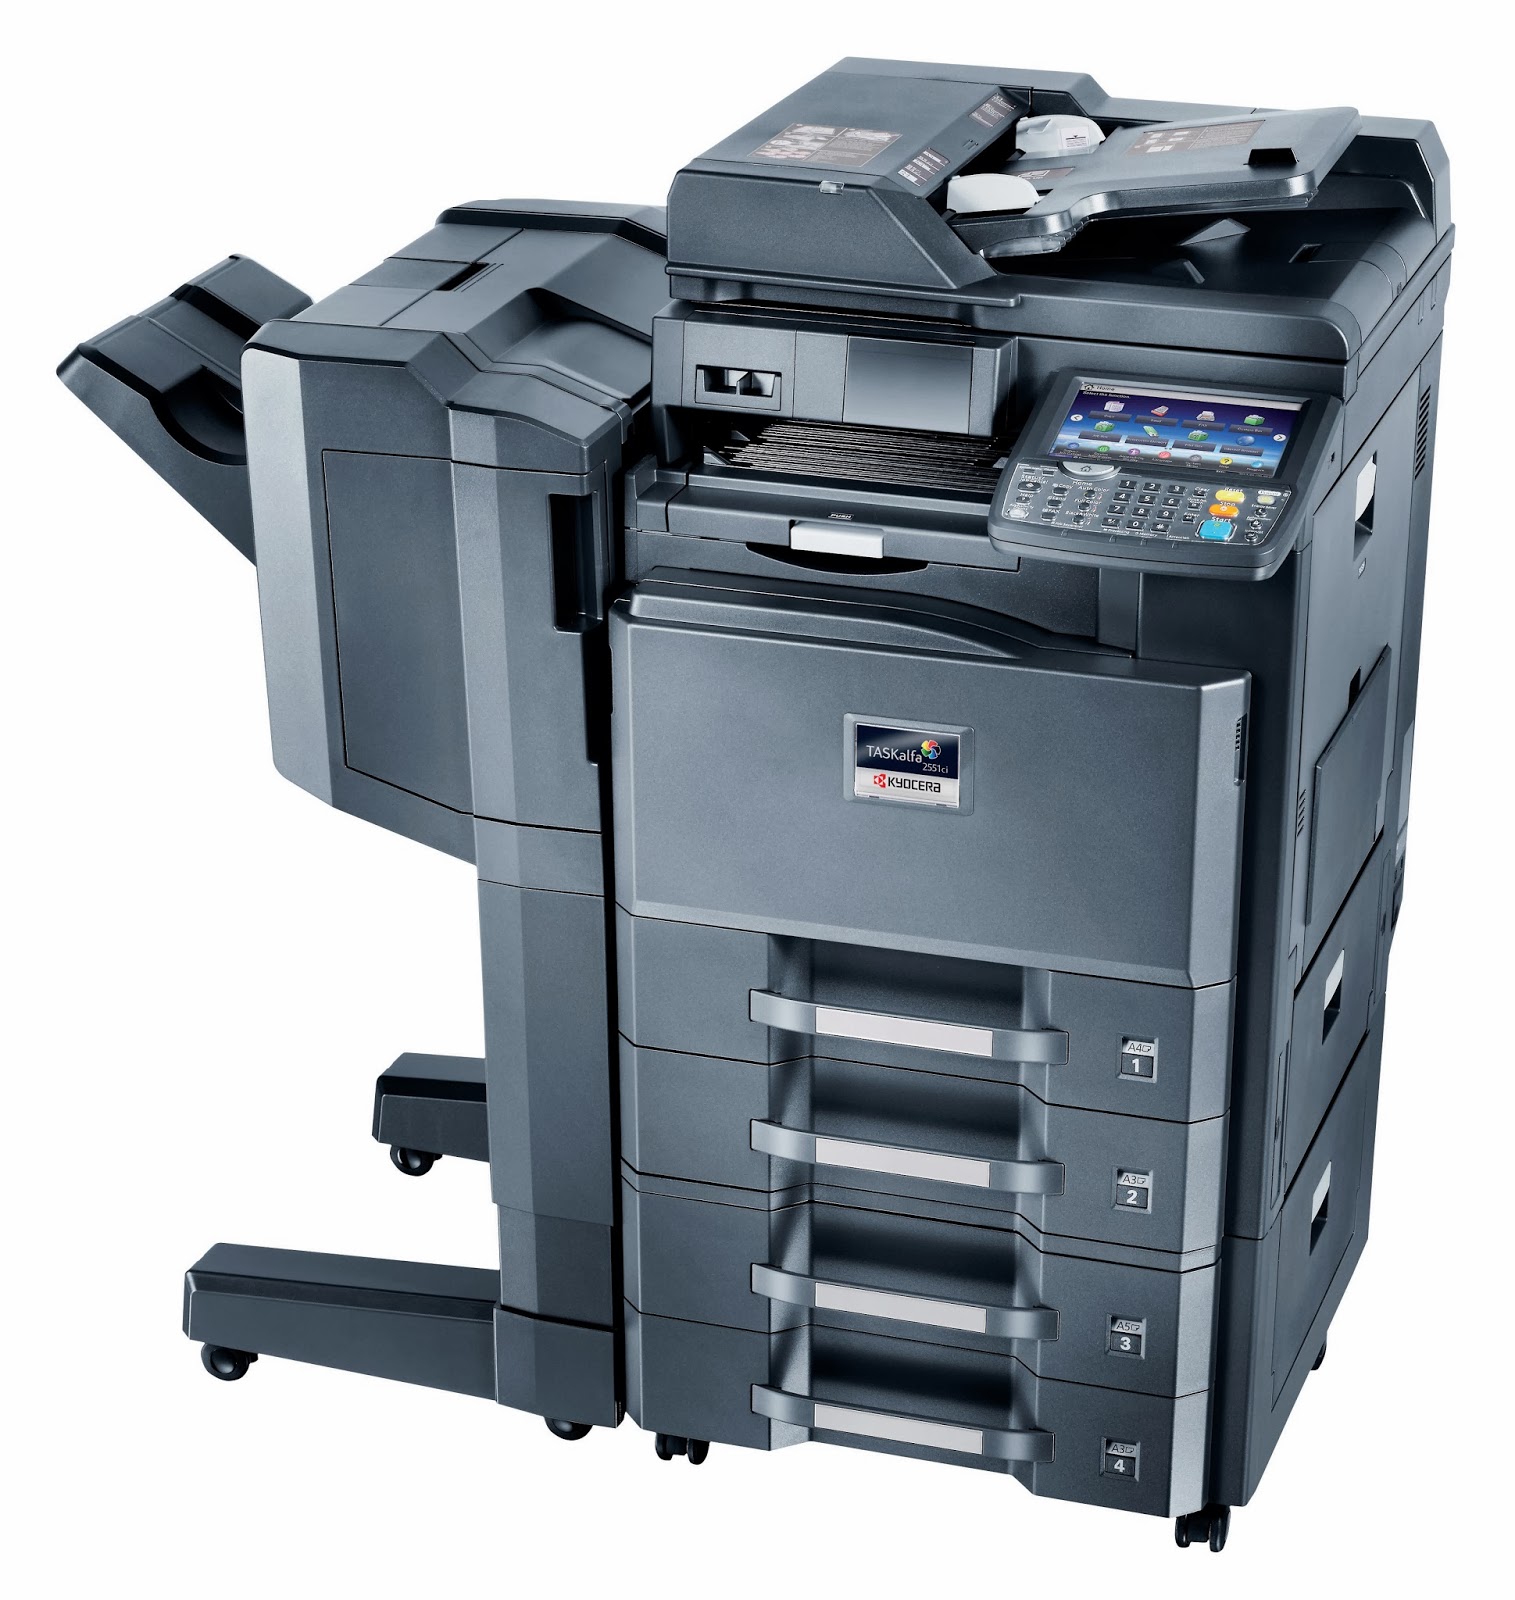 Kyocera Document Solutions has unveiled a Multi-Functional Printer